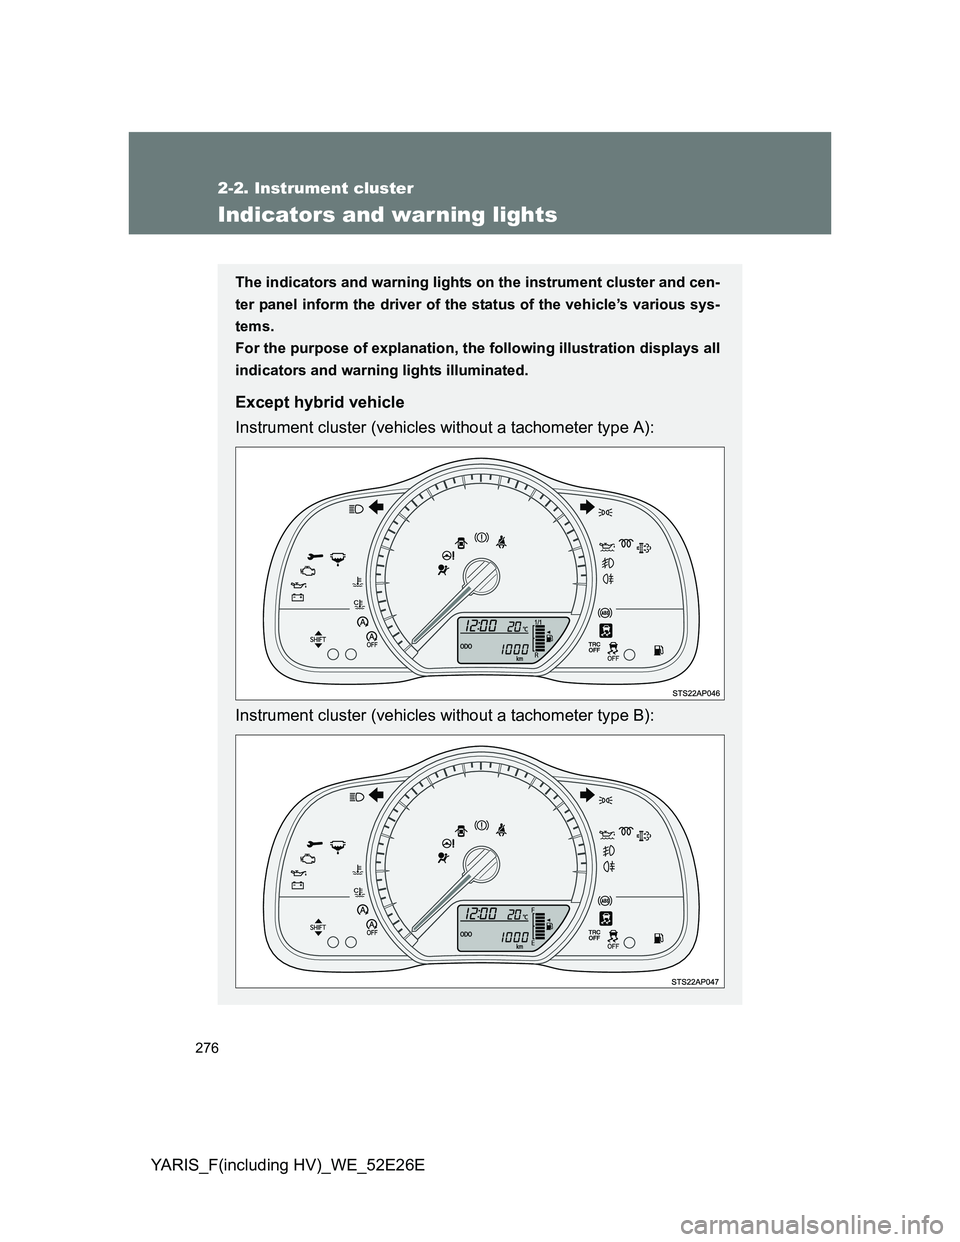 TOYOTA YARIS 2013  Owners Manual 276
2-2. Instrument cluster
YARIS_F(including HV)_WE_52E26E
Indicators and warning lights
The indicators and warning lights on the instrument cluster and cen-
ter panel inform the driver of the status